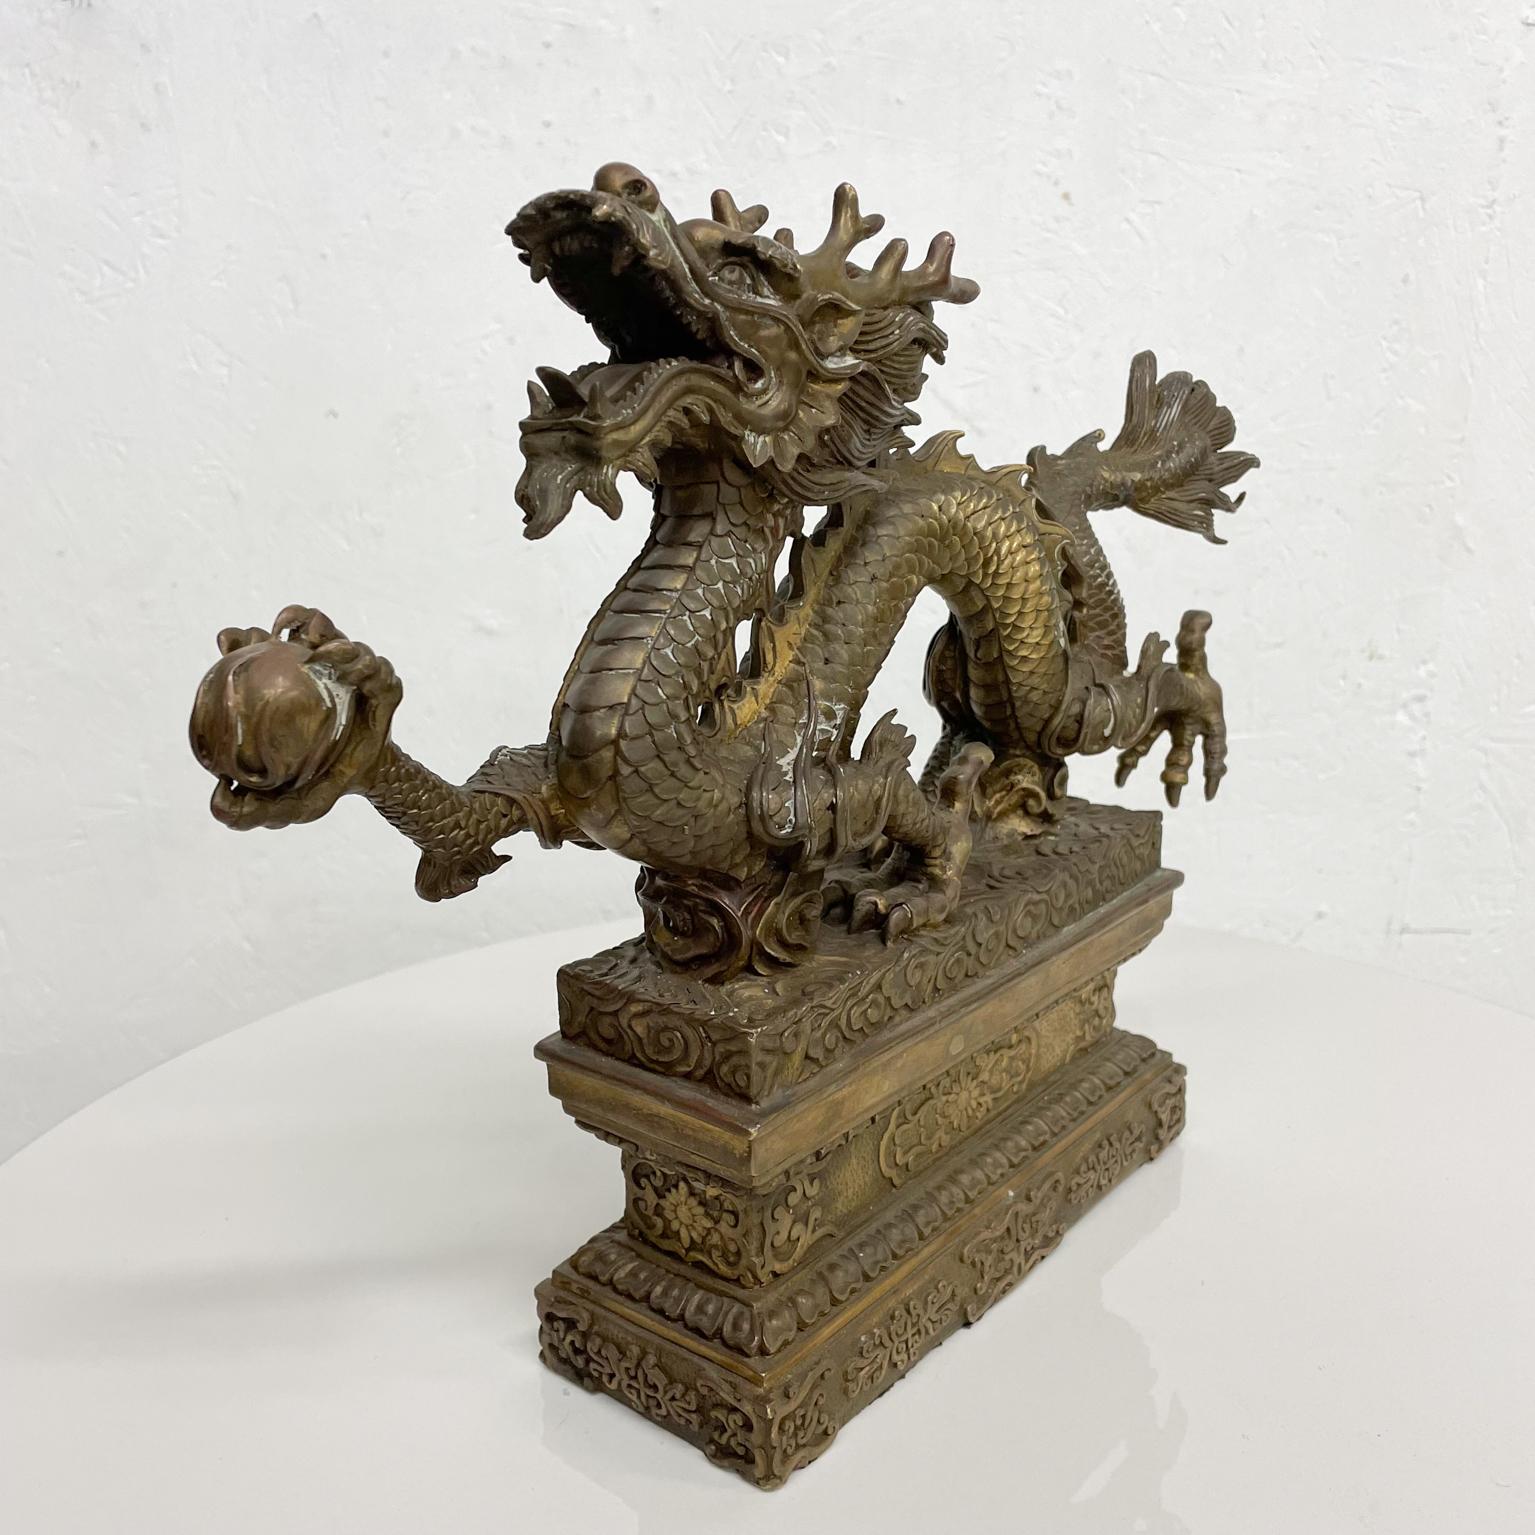 19th Century Powerful Chinese Feng Shui Dragon with Ball Bronze Sculpture Ornate Relief